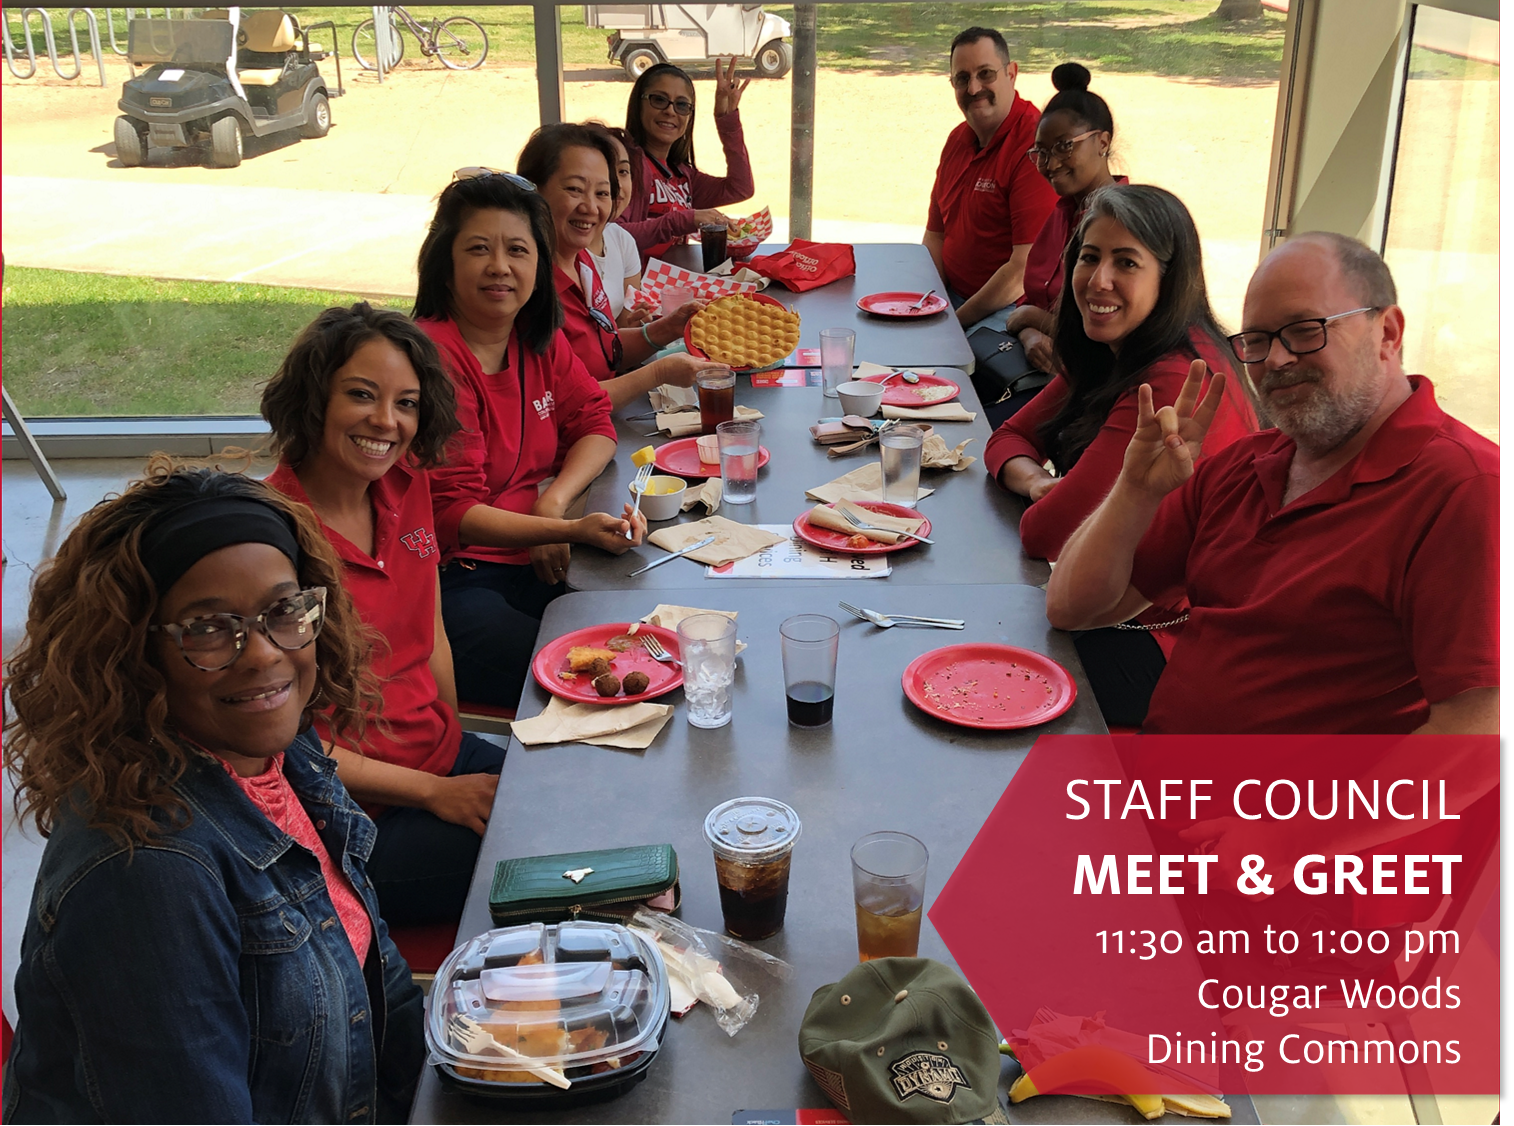 Meet Your Staff Council Representatives! Join us at the Staff Council Meet and Greet gatherings